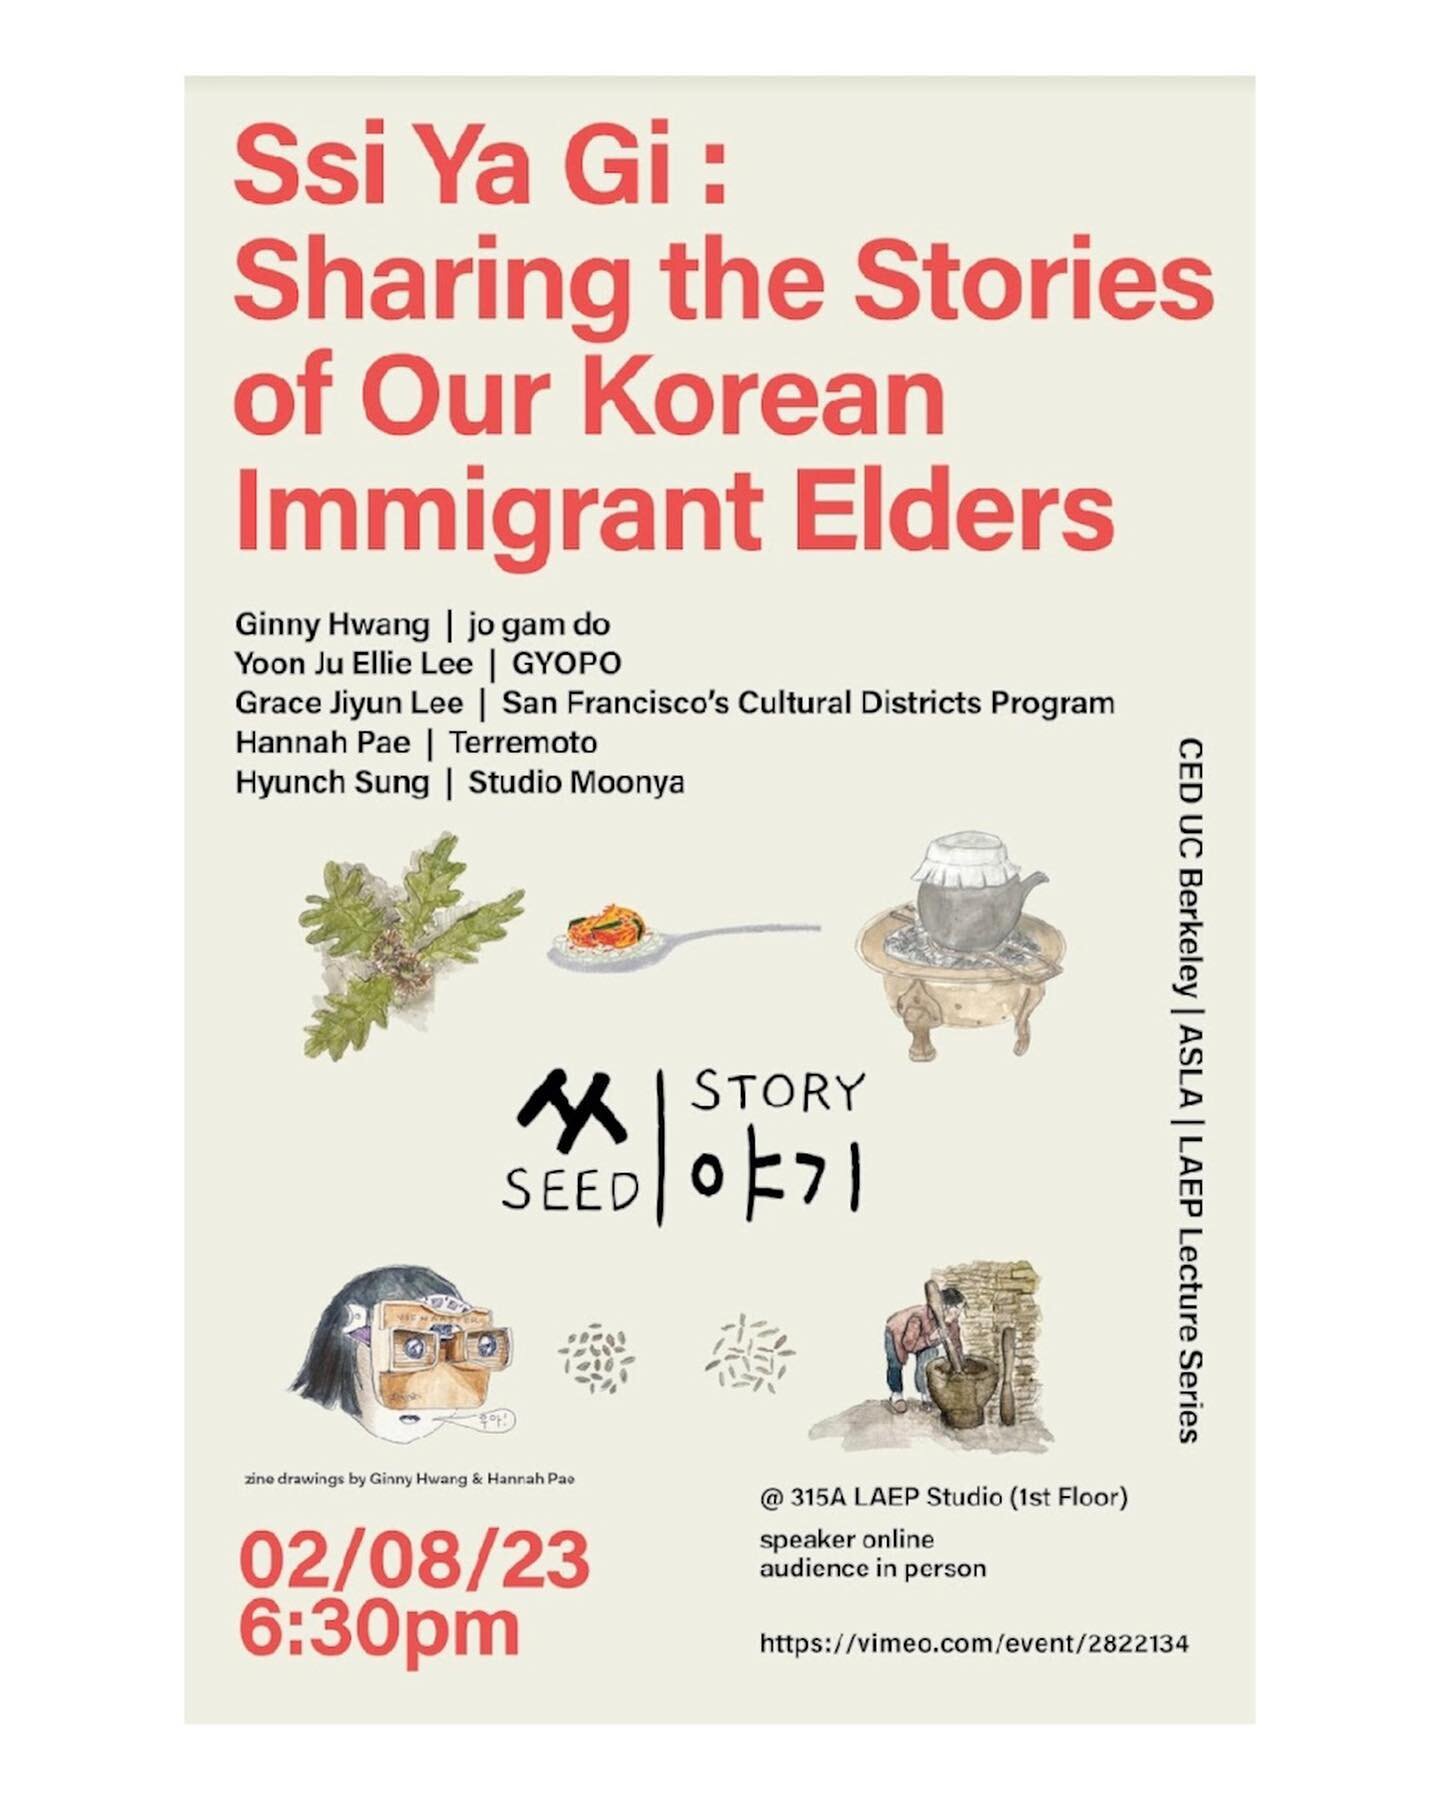 Please join us Wed Feb 8th for a talk on all things Ssi Ya Gi!🌶️🌱🍲

Find out what we&rsquo;re all about, what we&rsquo;ve been working on and what we see for the future 🔮:

Uplifting and honoring our elders, inter-generational community bonding, 